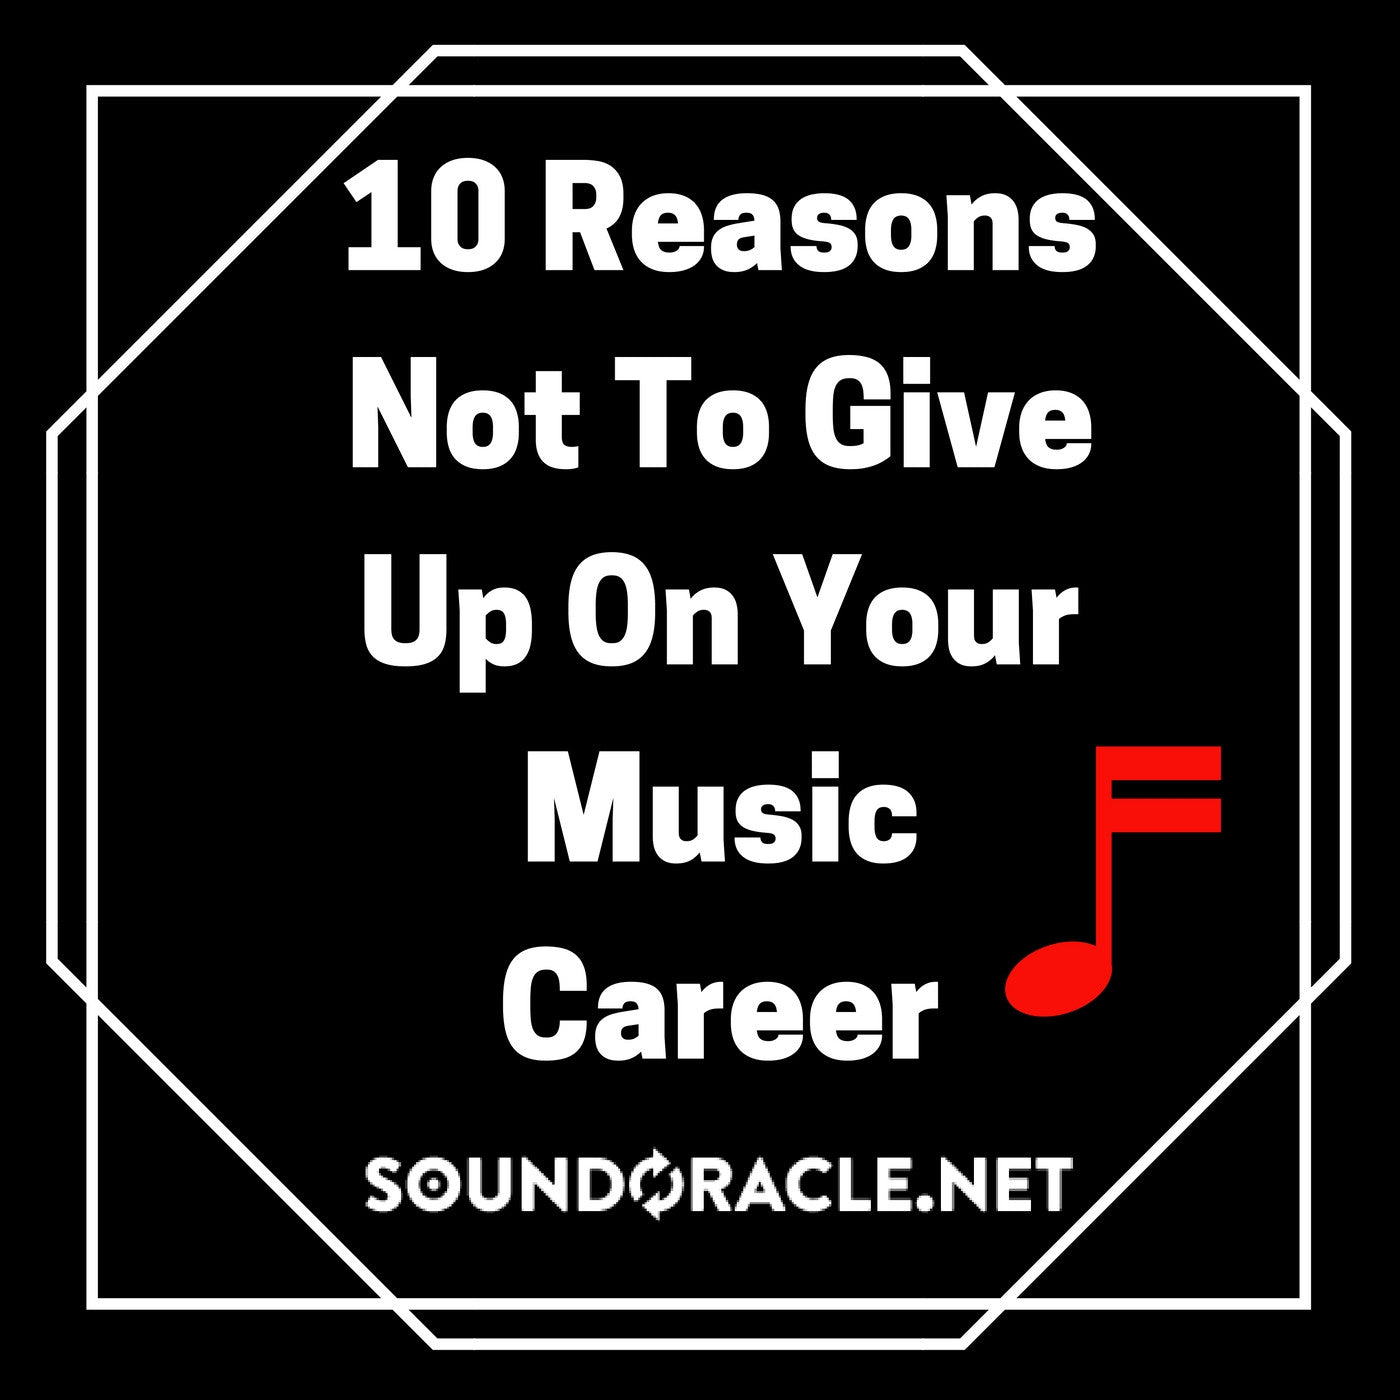 10 Reasons Not To Give Up On Your Music Career